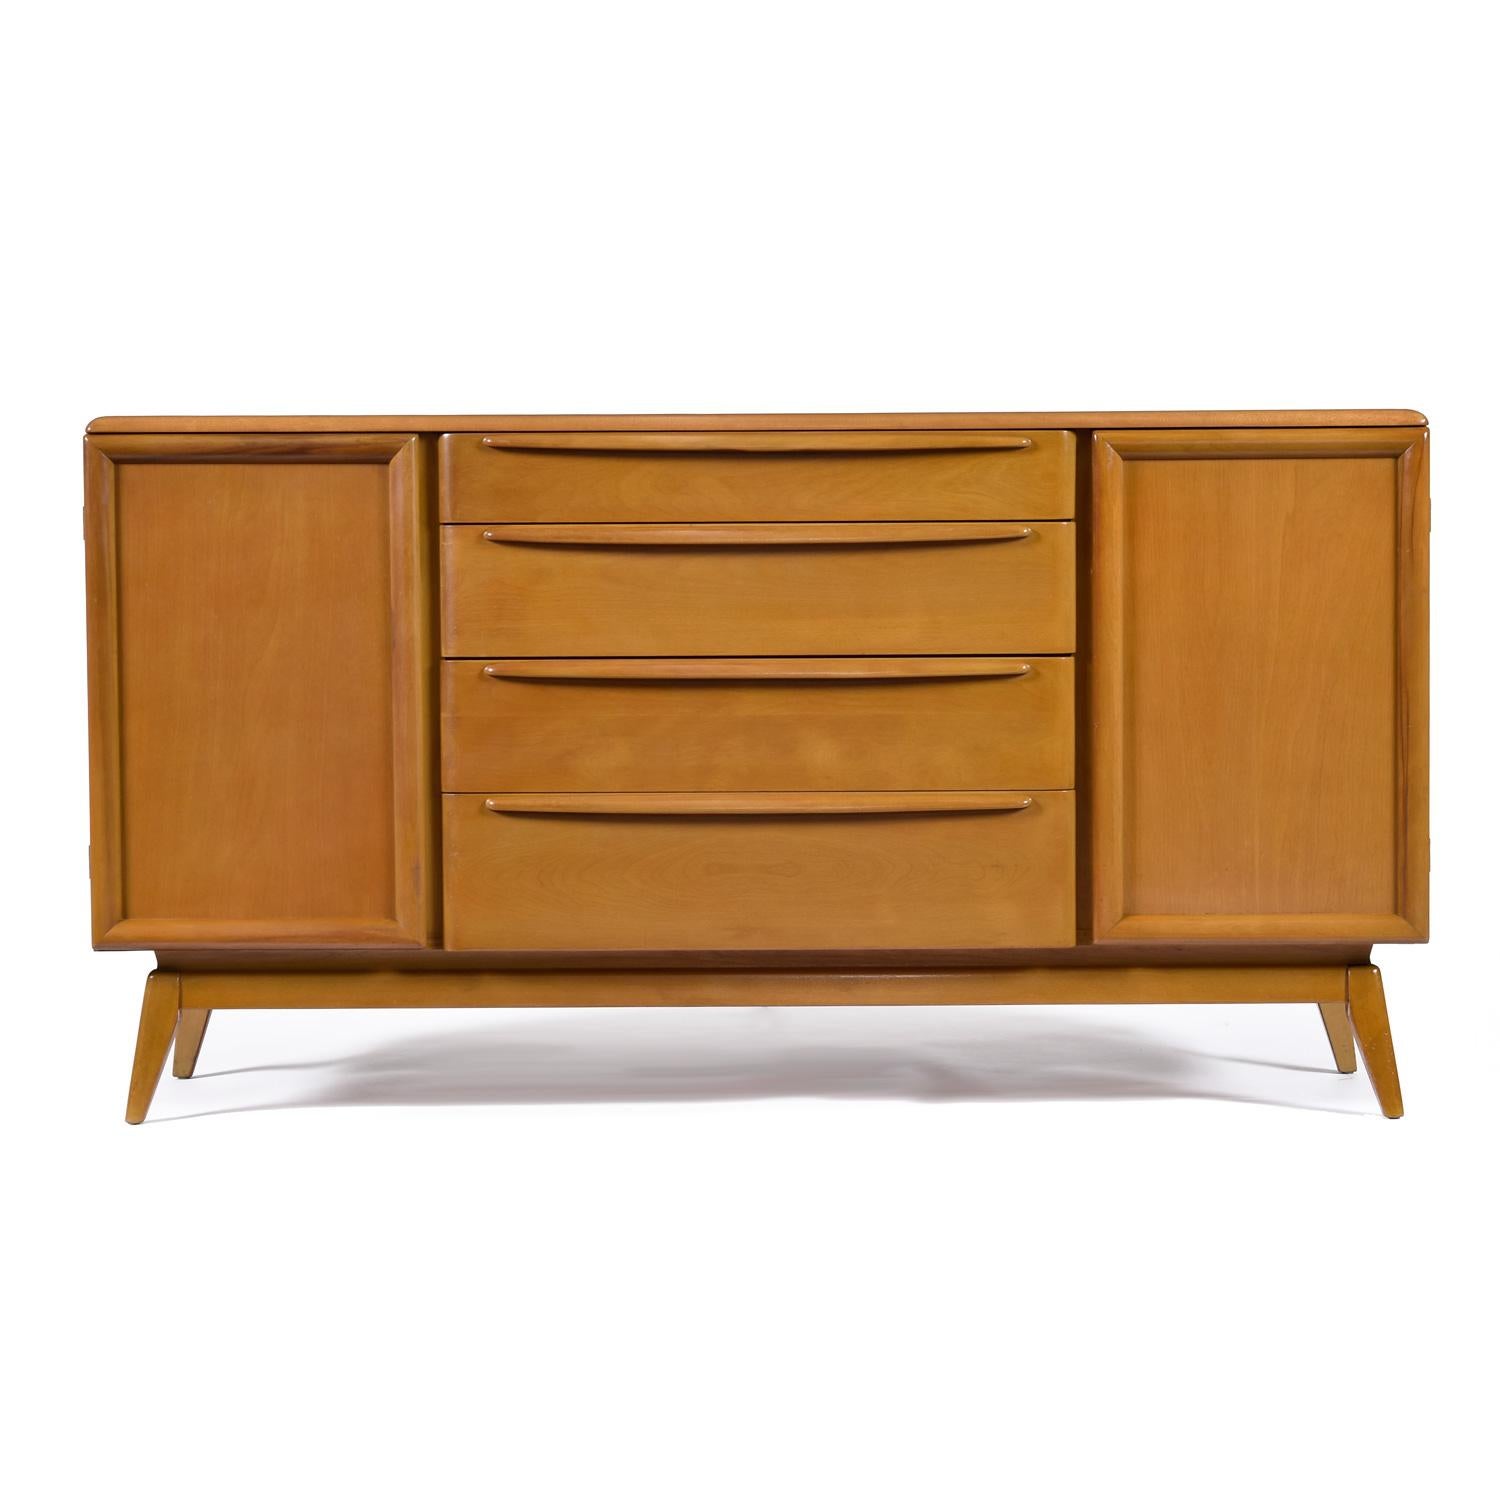 Versatility abounds with this Heywood Wakefield credenza.  Buffet, media cabinet, or entryway console are just a few ideas. As a dry bar, the adjustable / removable shelves will allow you to keep that whiskey collection cozy.  The top drawer sports